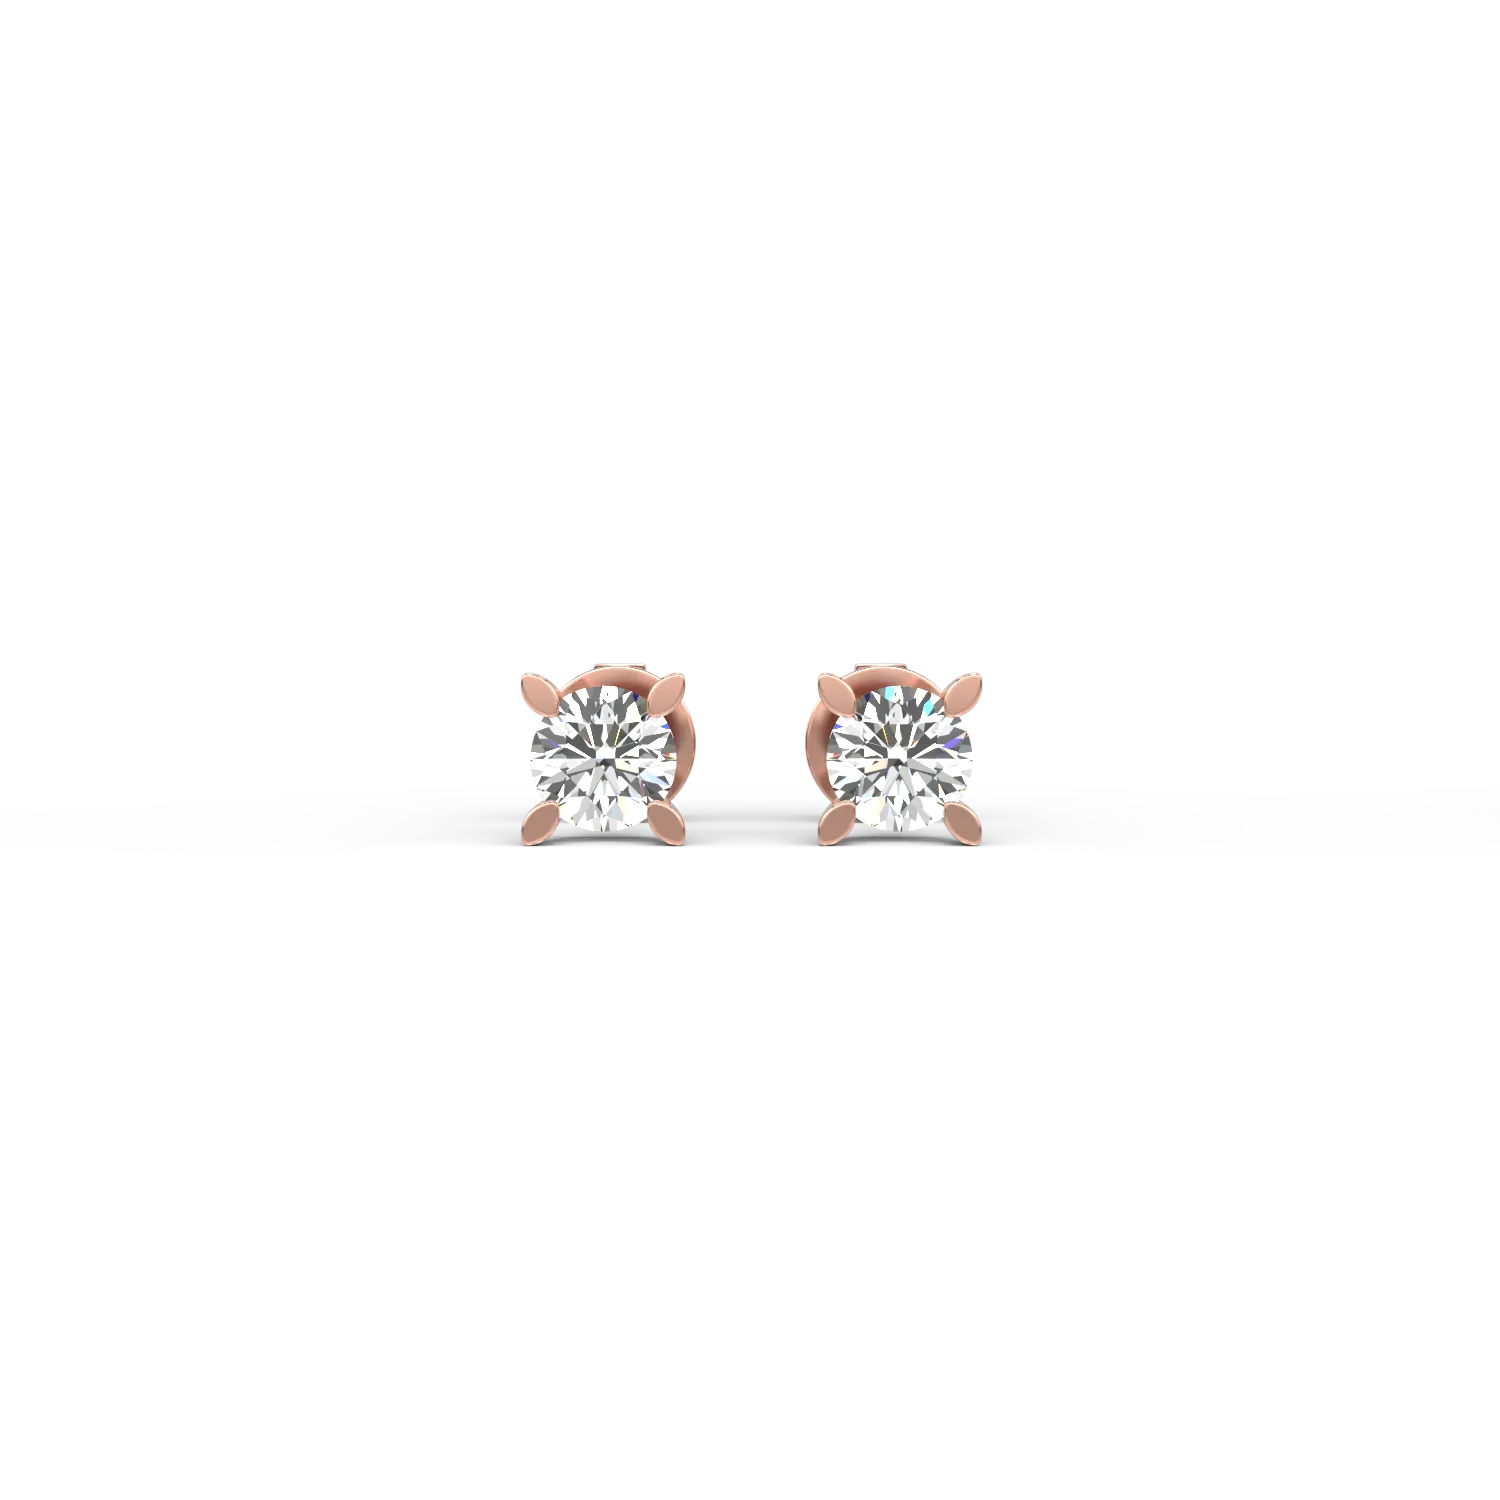 18K rose gold earrings with 0.8ct diamonds